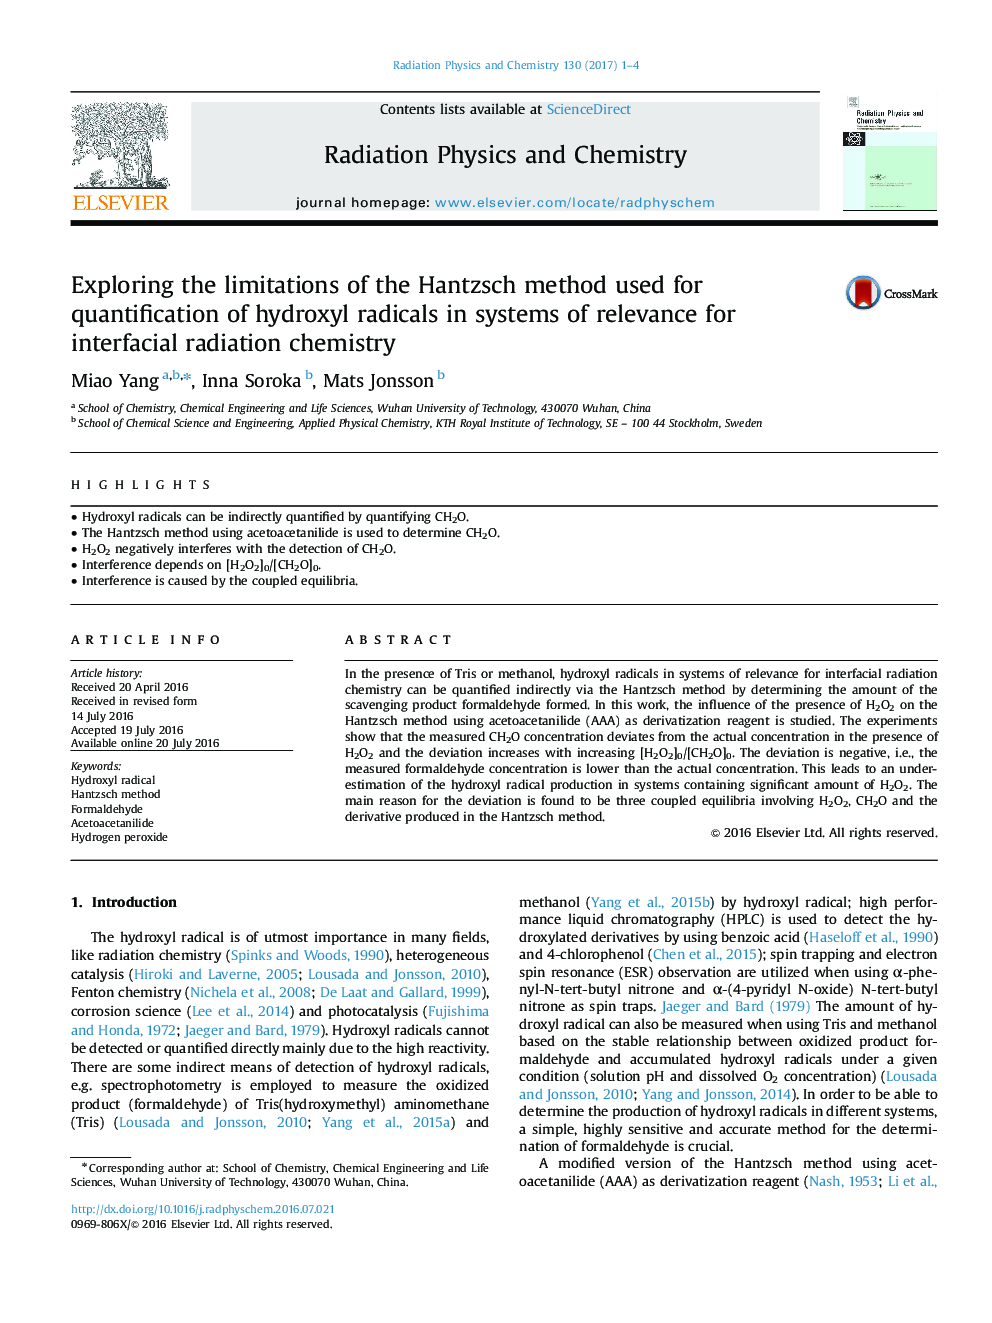 Exploring the limitations of the Hantzsch method used for quantification of hydroxyl radicals in systems of relevance for interfacial radiation chemistry